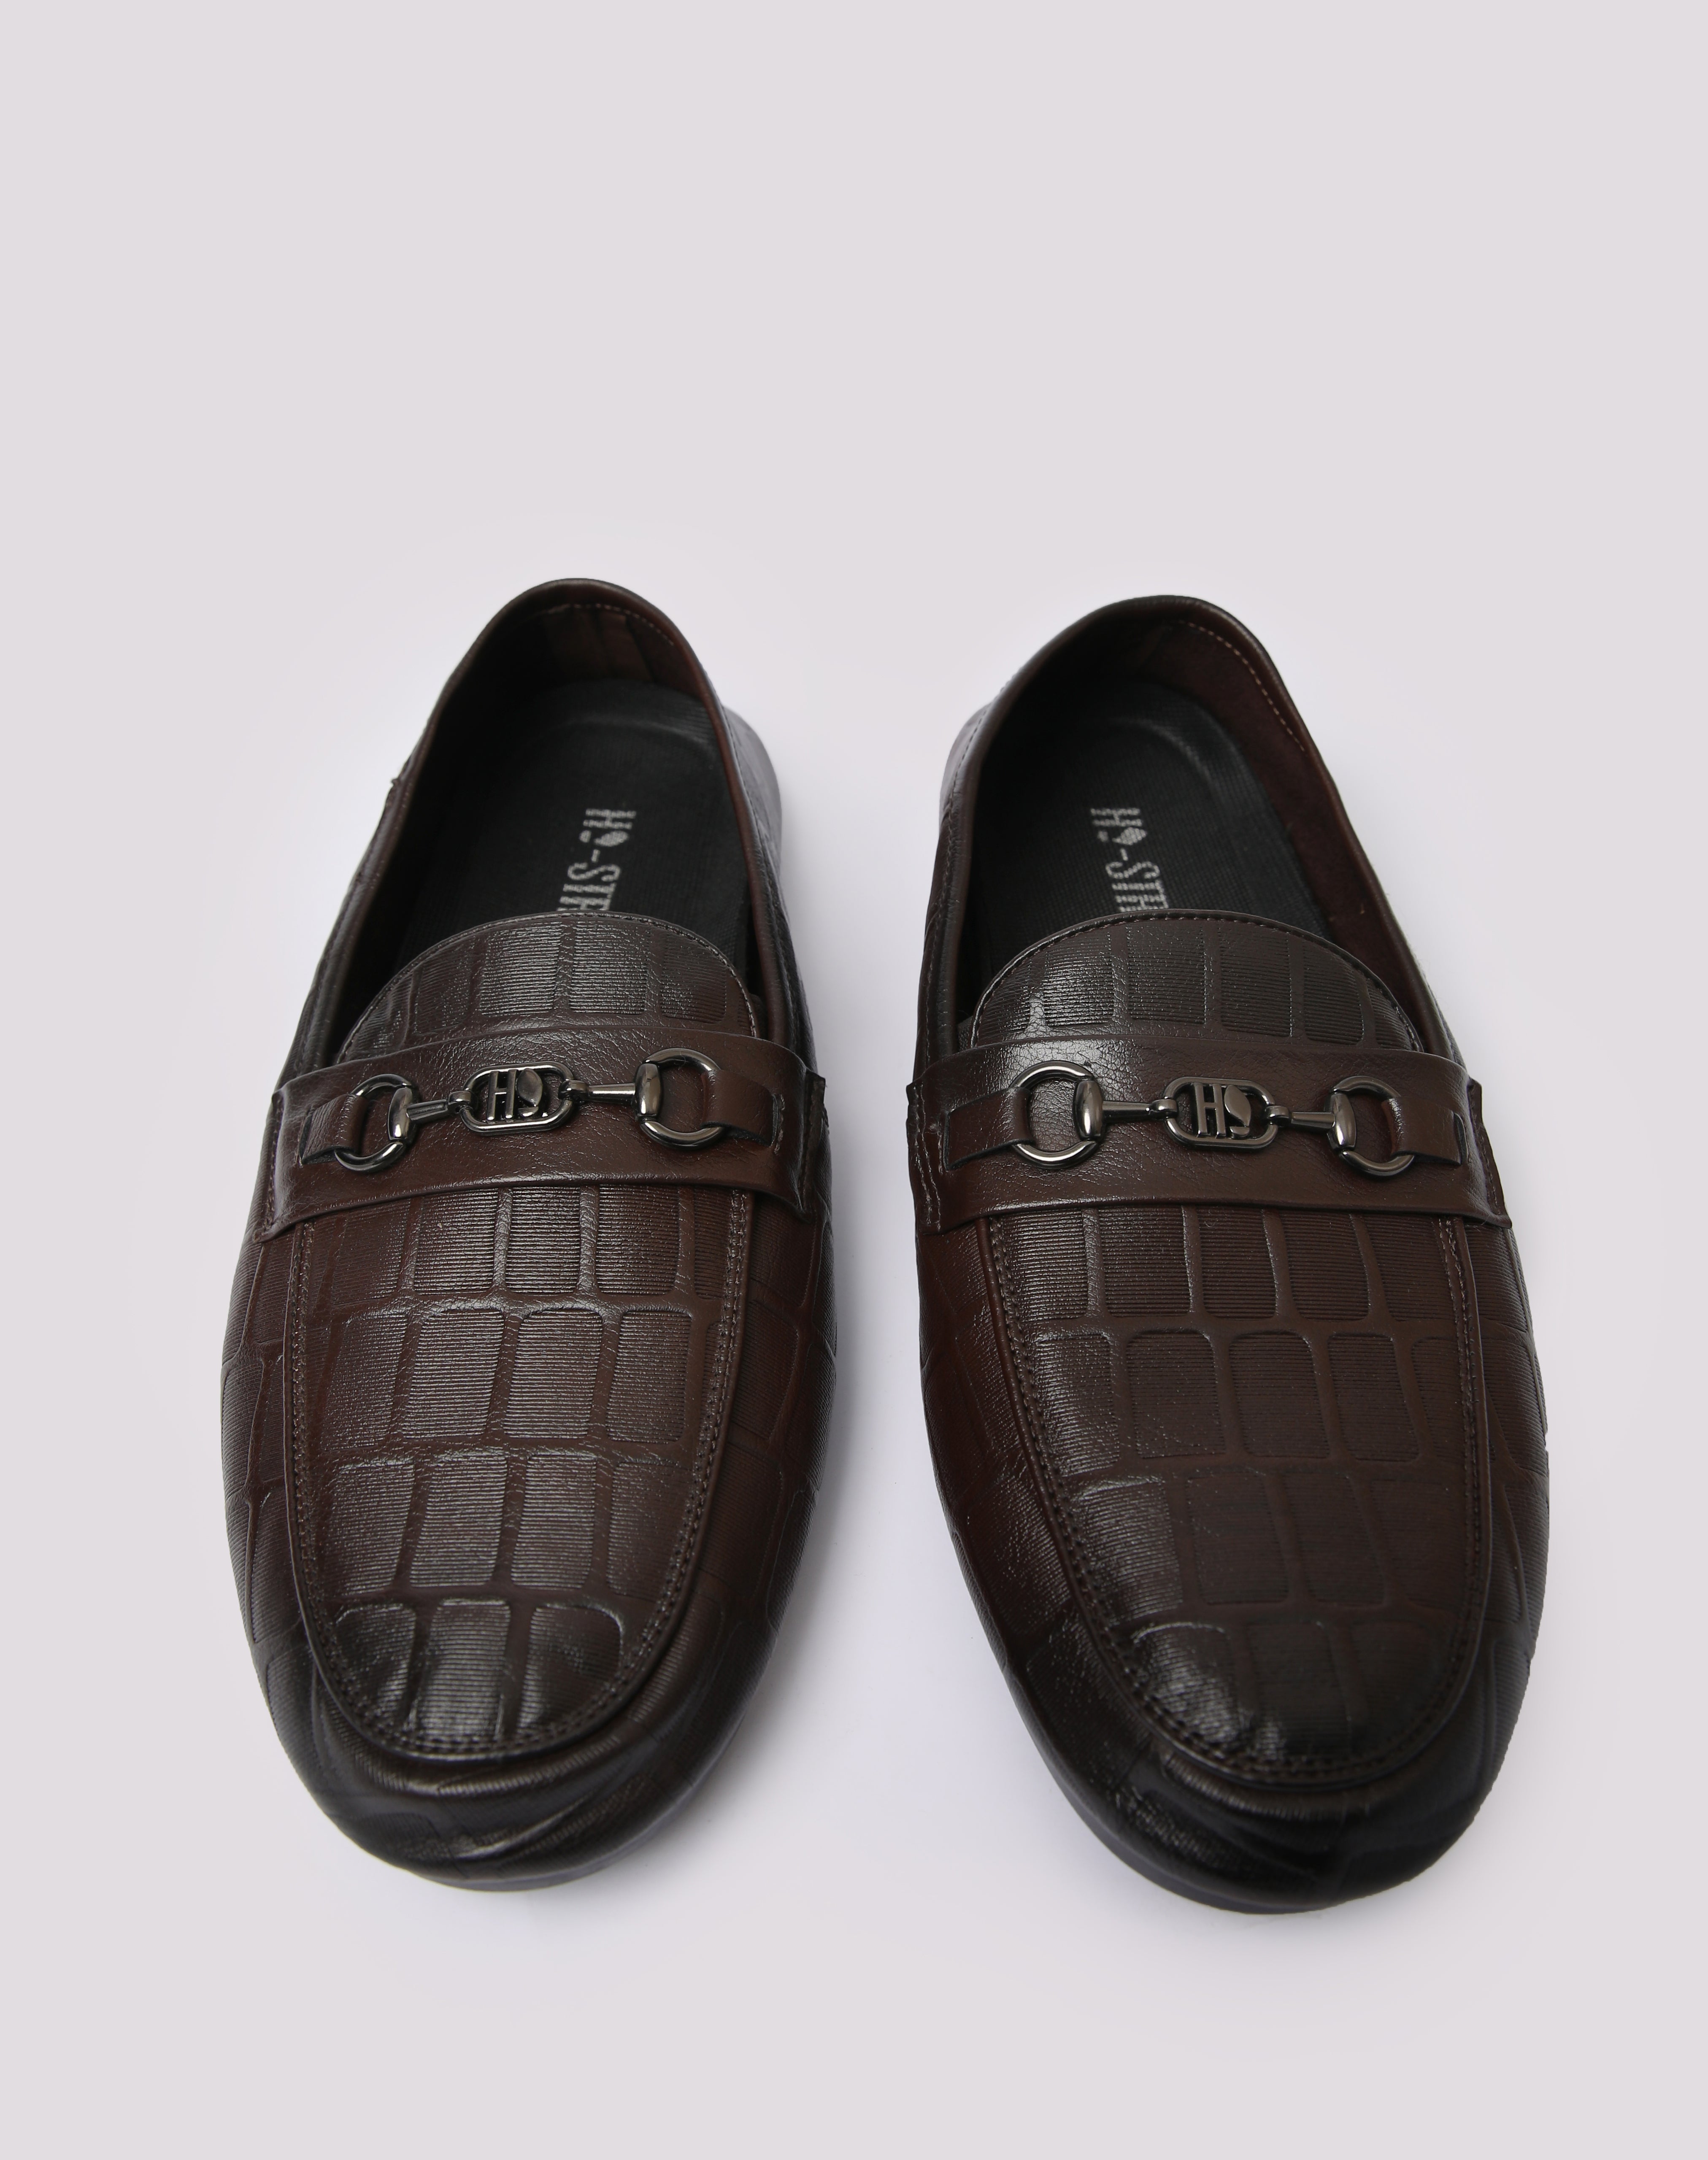 BROWN SOFT LEATHER LOAFERS